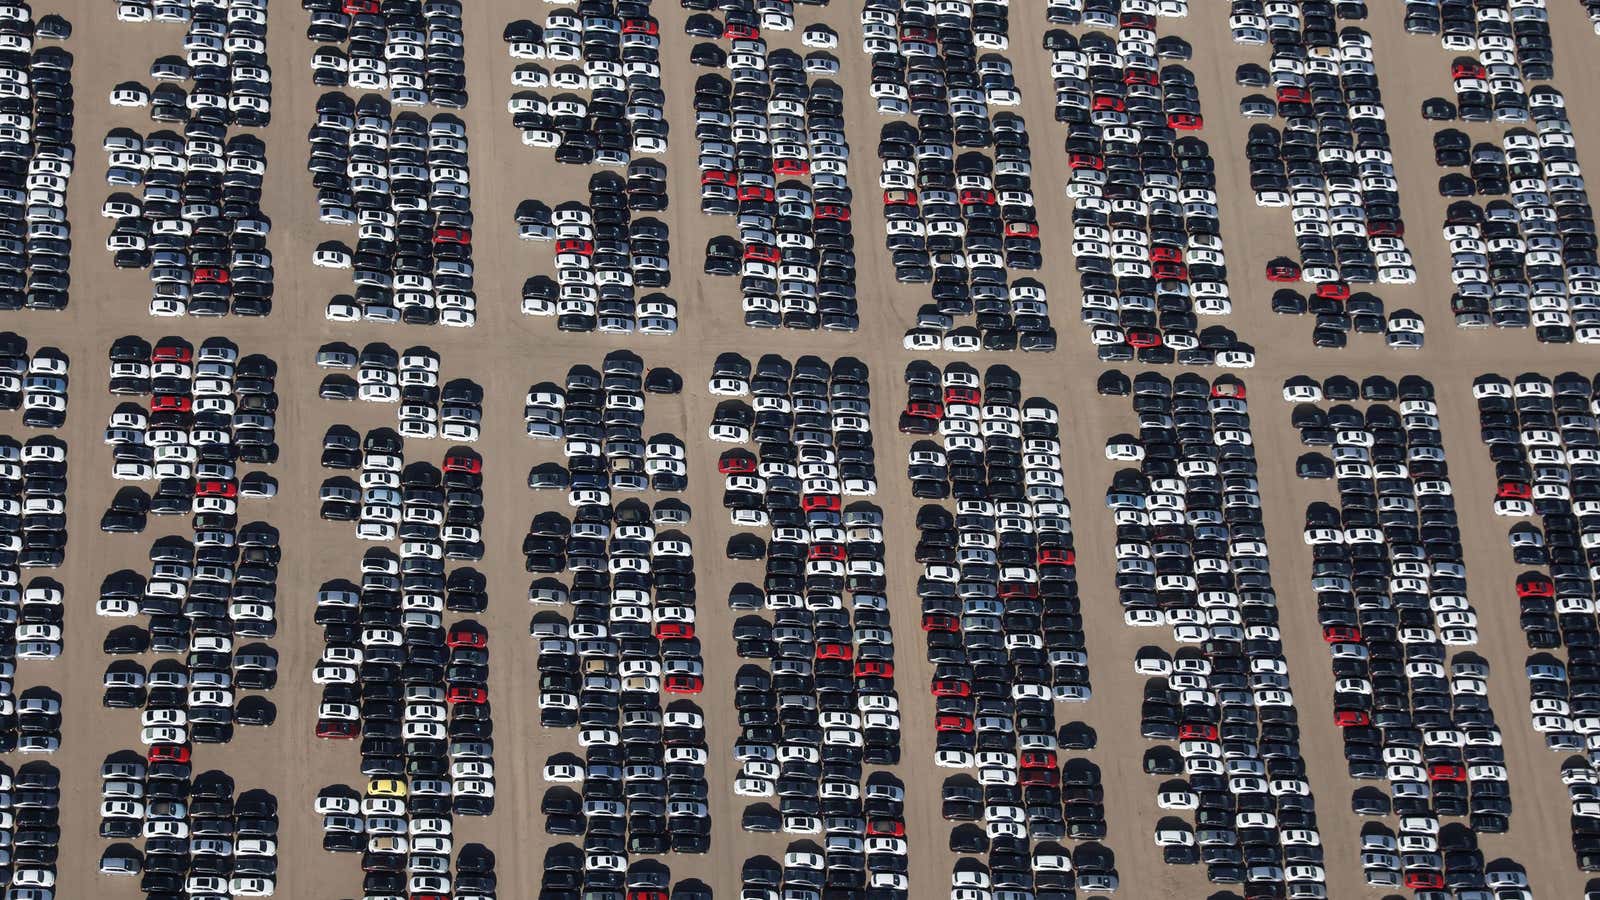 Reacquired Volkswagen and Audi diesel cars sit in a desert graveyard near Victorville, Calif., on Mar. 28.